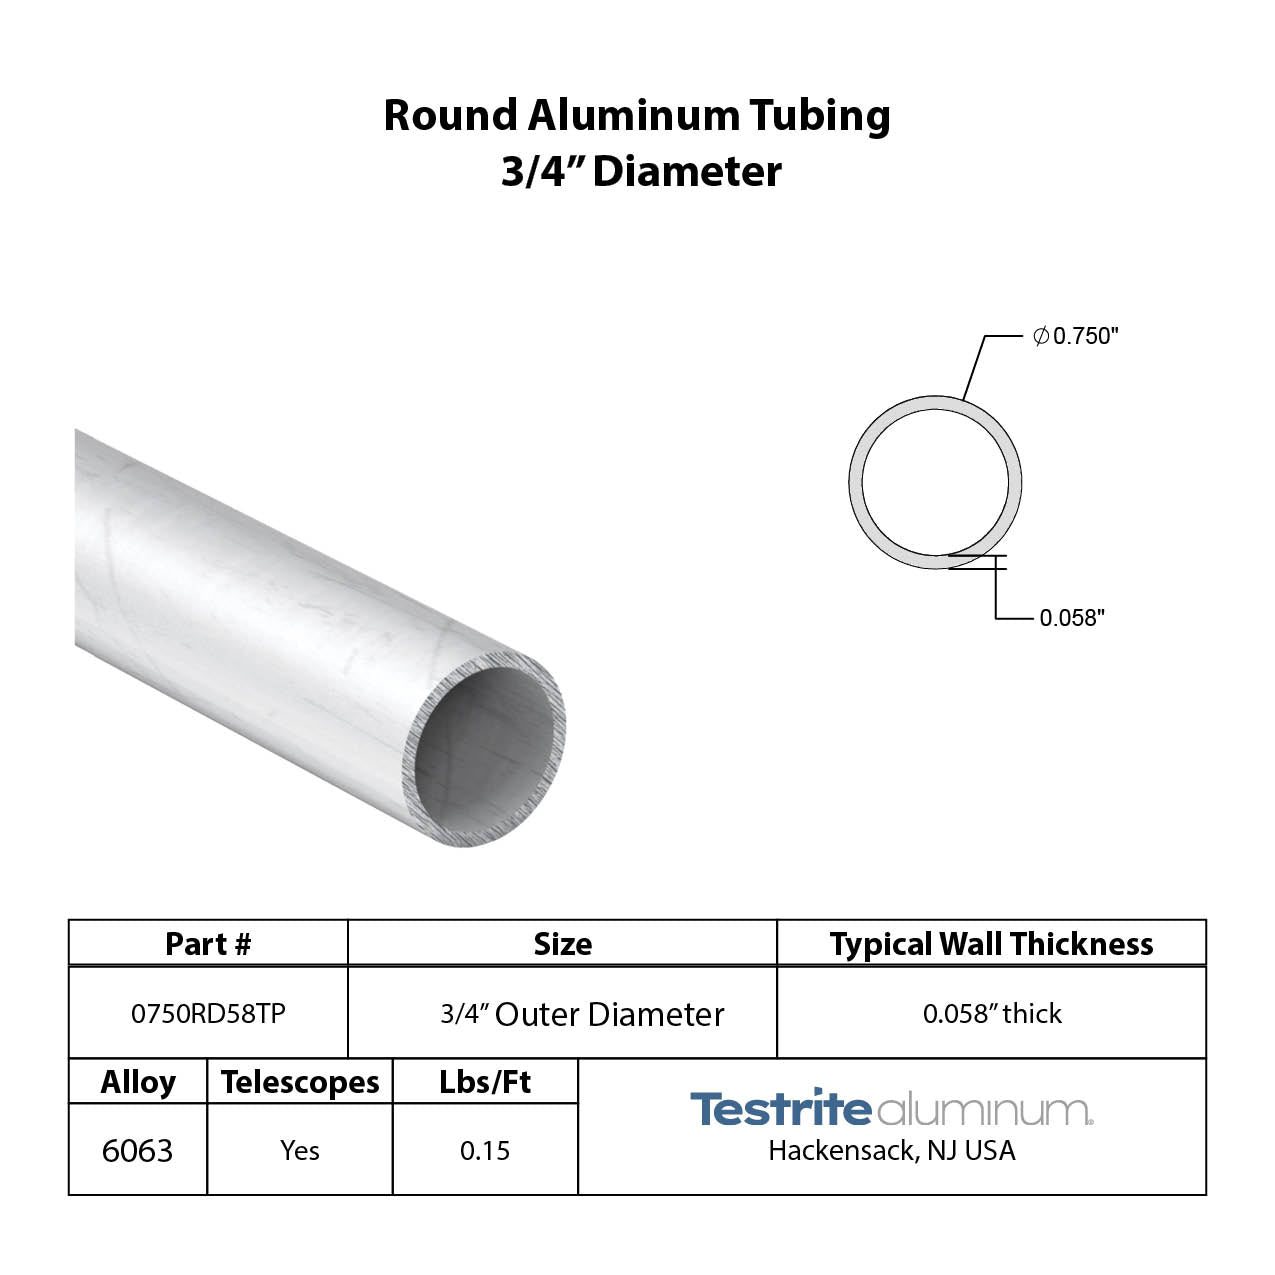 Specifications for 3/4" OD x .058" Wall Drawn Round Aluminum Tubing Telescopic, 0.75" OD x .058" wall round aluminum tube, designed to fit inside our 7/8" OD x .058" wall tube and to accept our 5/8" OD x .038" Wall tube inside of it (thinner wall on our 5/8" tube), all telescoping compatible